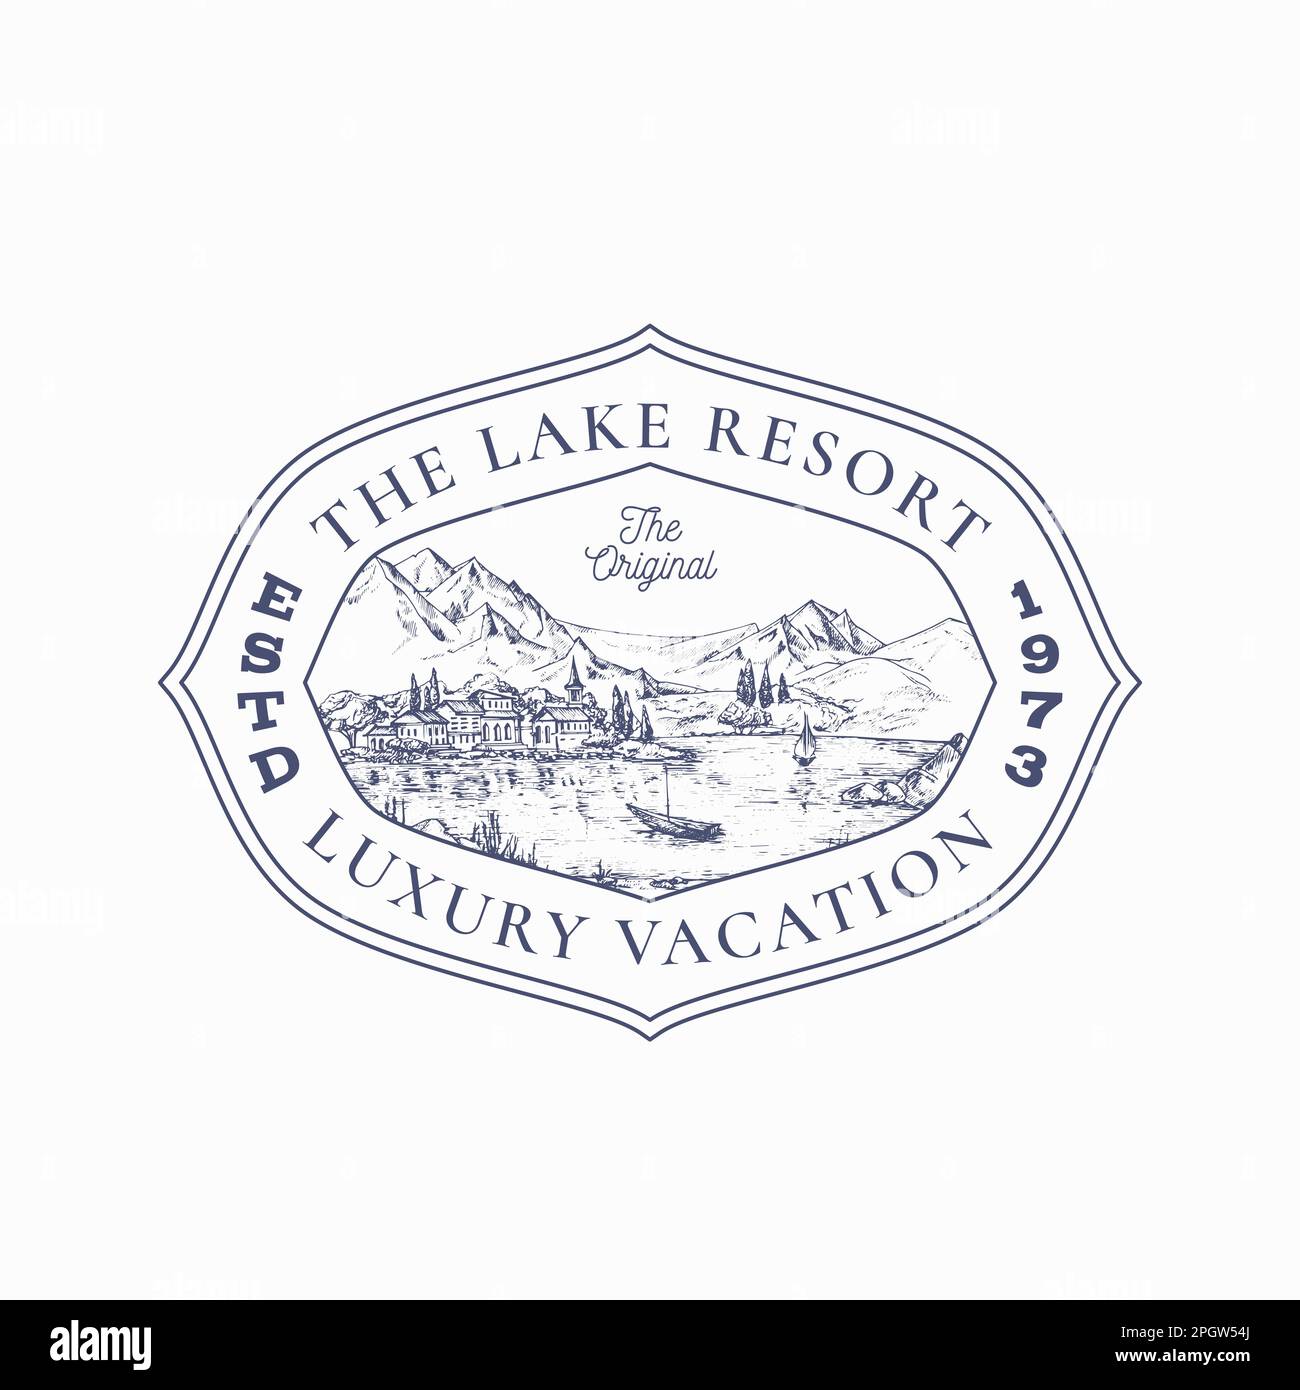 Outdoor Recreation Vacation Frame Badge Logo Template. Hand Drawn Mansion Building near Lake and Mountains Landscape Sketch with Retro Typography and Stock Vector